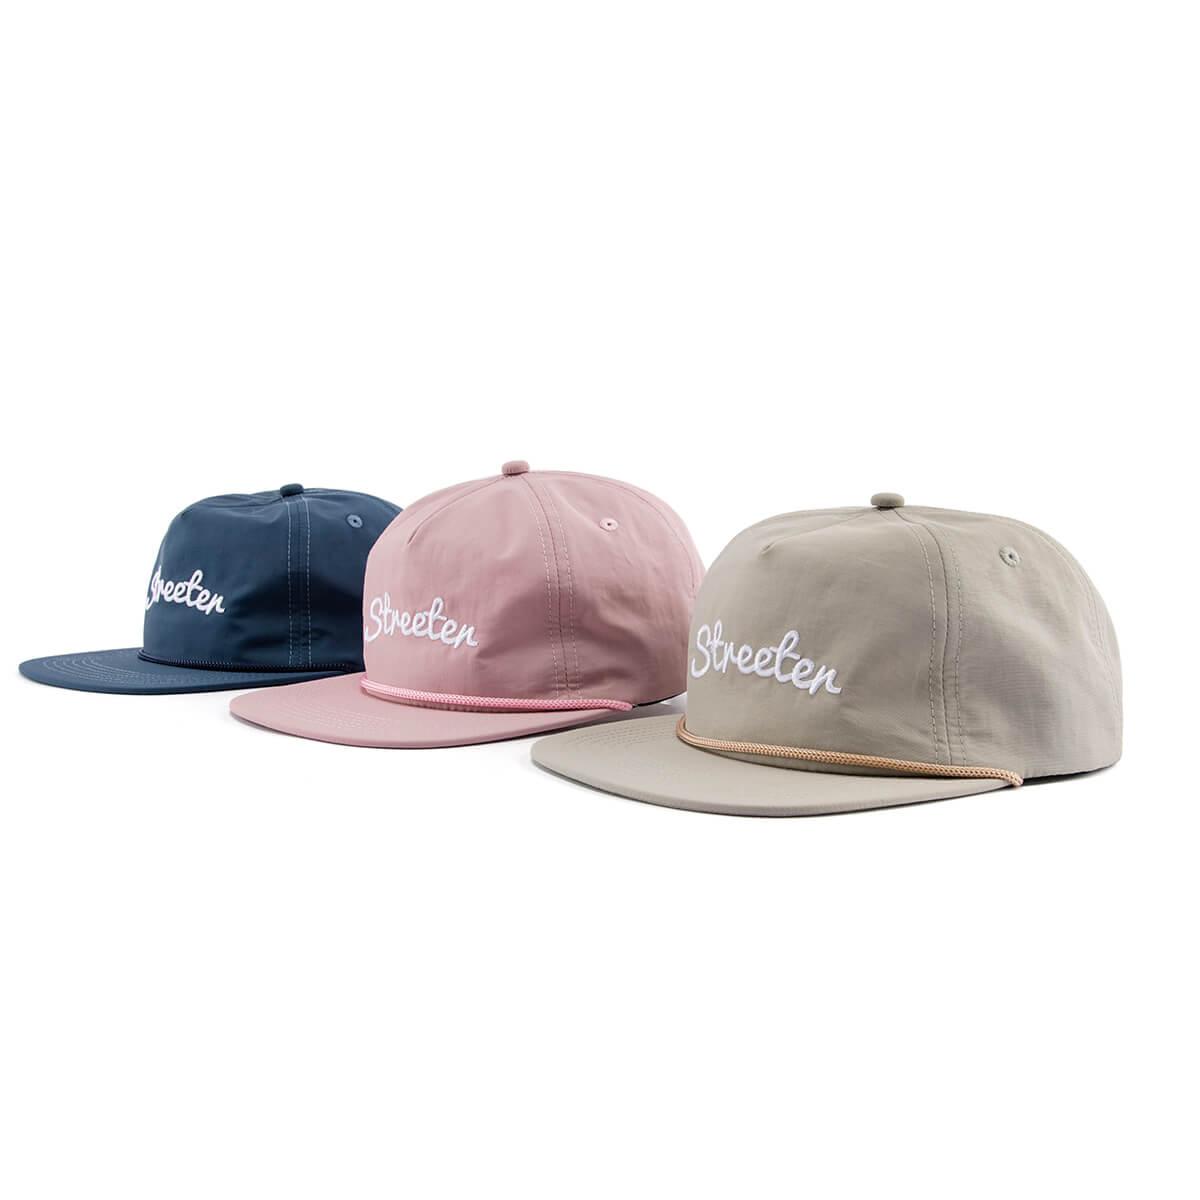 Streeter waterproof kid snapback hats with rope available in dark blue, pink, khaki KN2102202